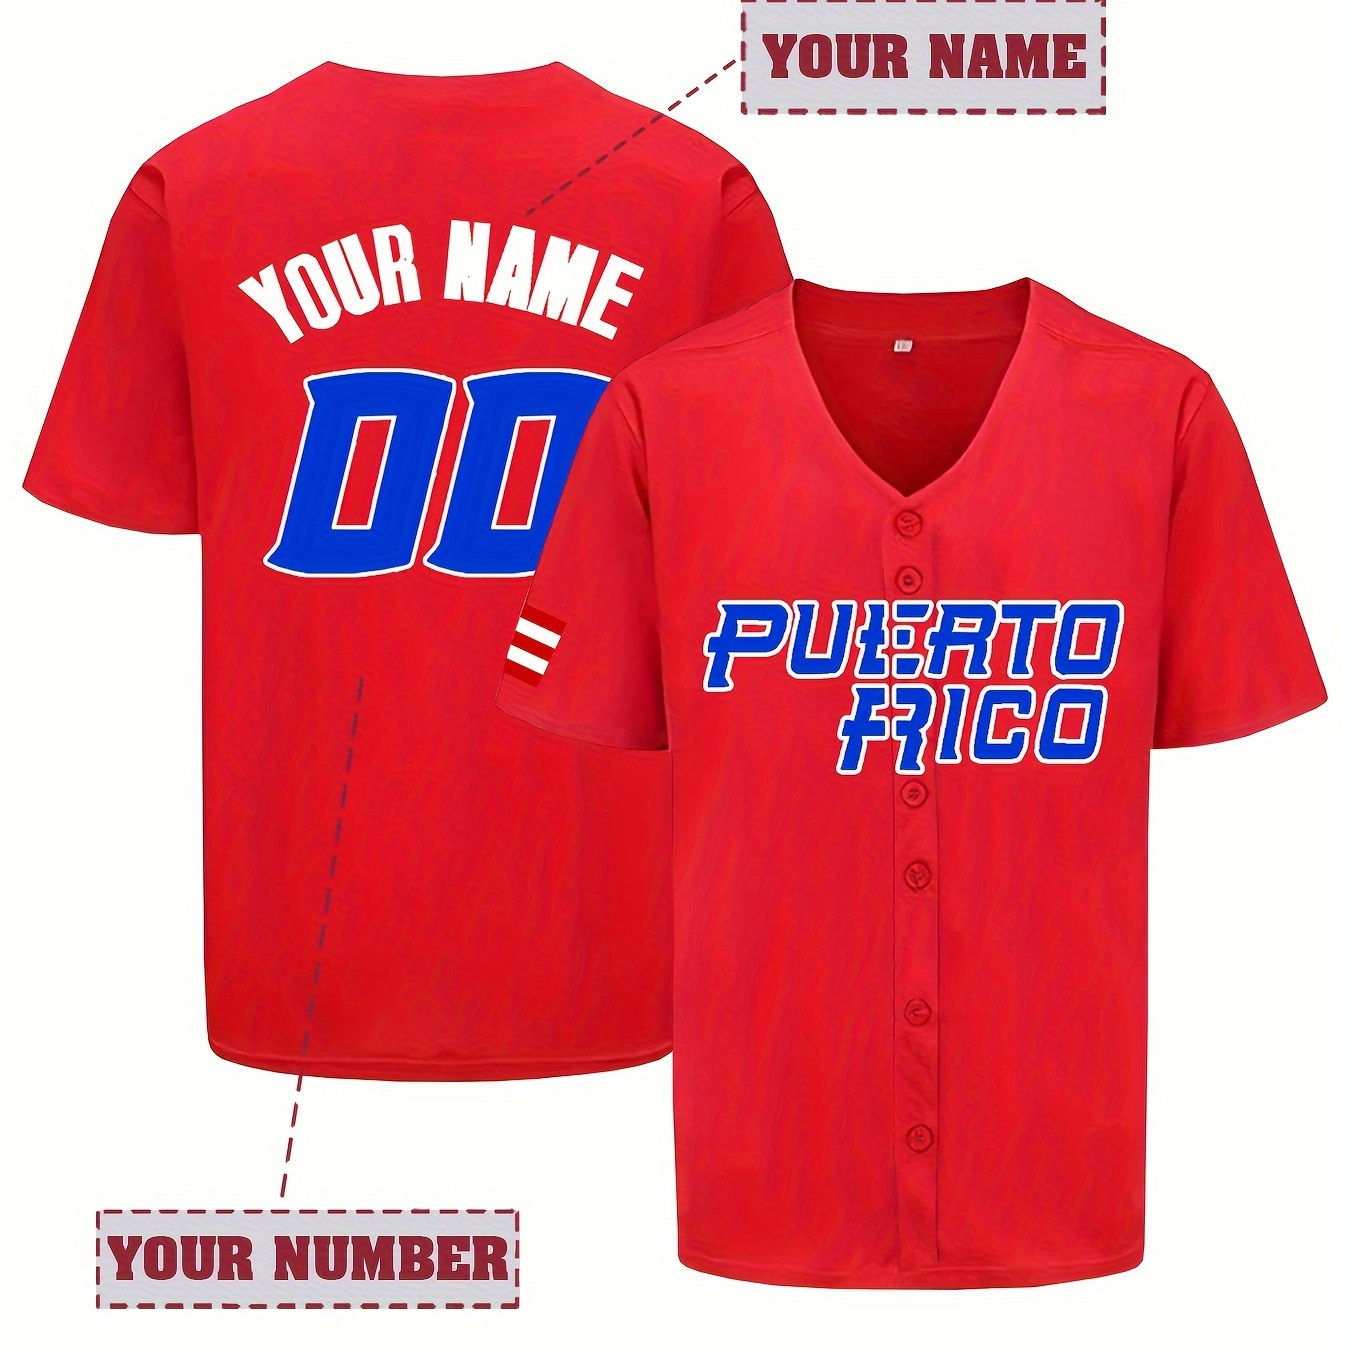 

Customized Men's V-neck Baseball Jersey, Short Sleeve Breathable Embroidered With Puerto Rico, Personalized Name & Number, Loose Fit Sport Shirt For Team Training